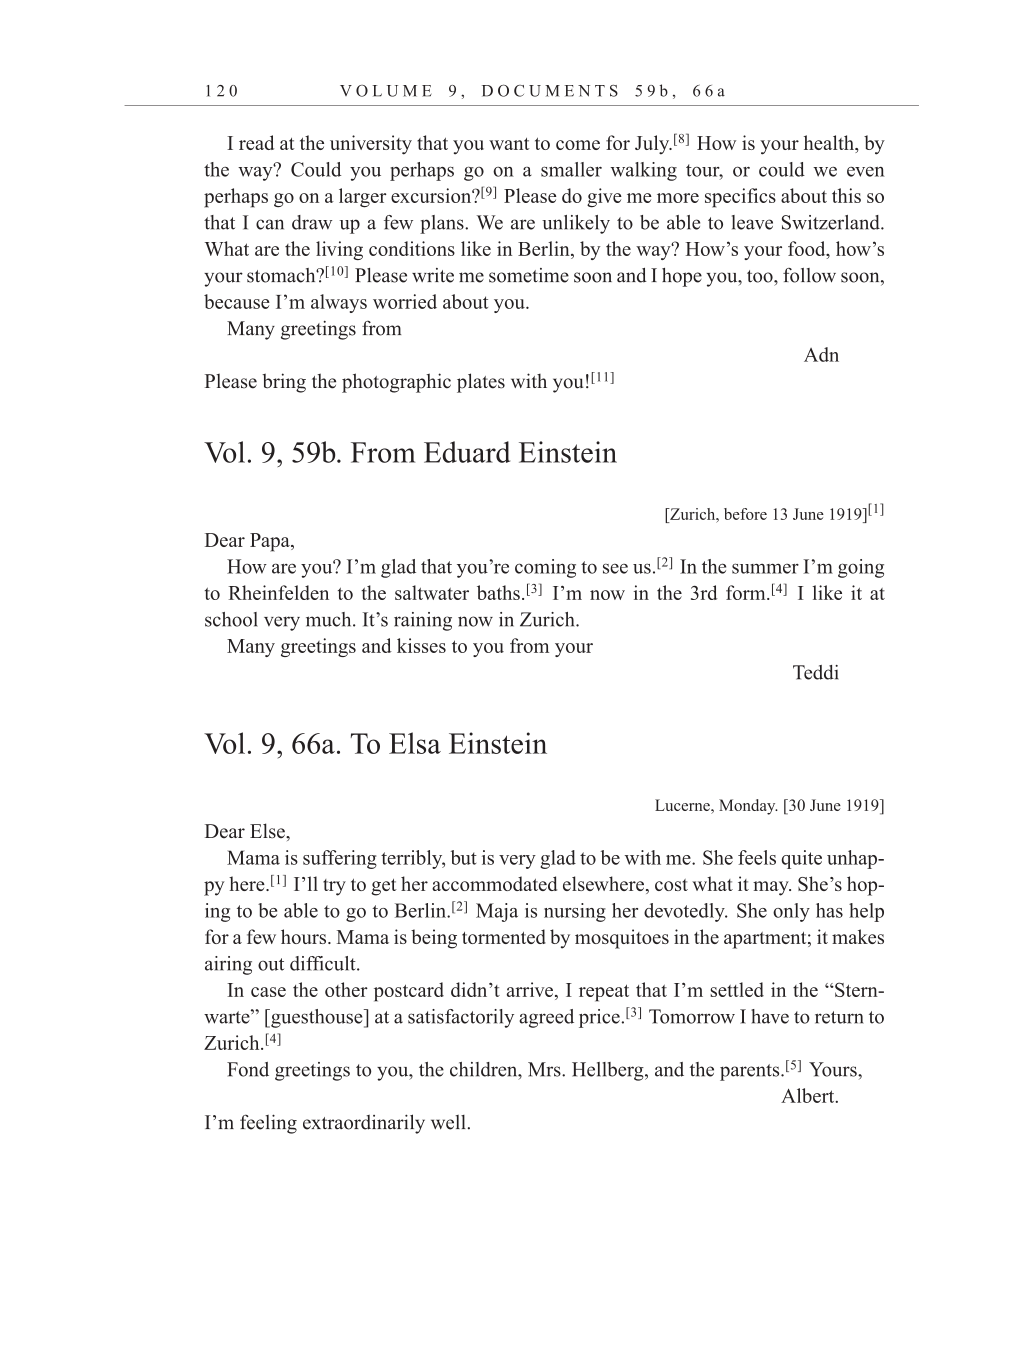 Volume 10: The Berlin Years: Correspondence, May-December 1920, and Supplementary Correspondence, 1909-1920 (English translation supplement) page 120